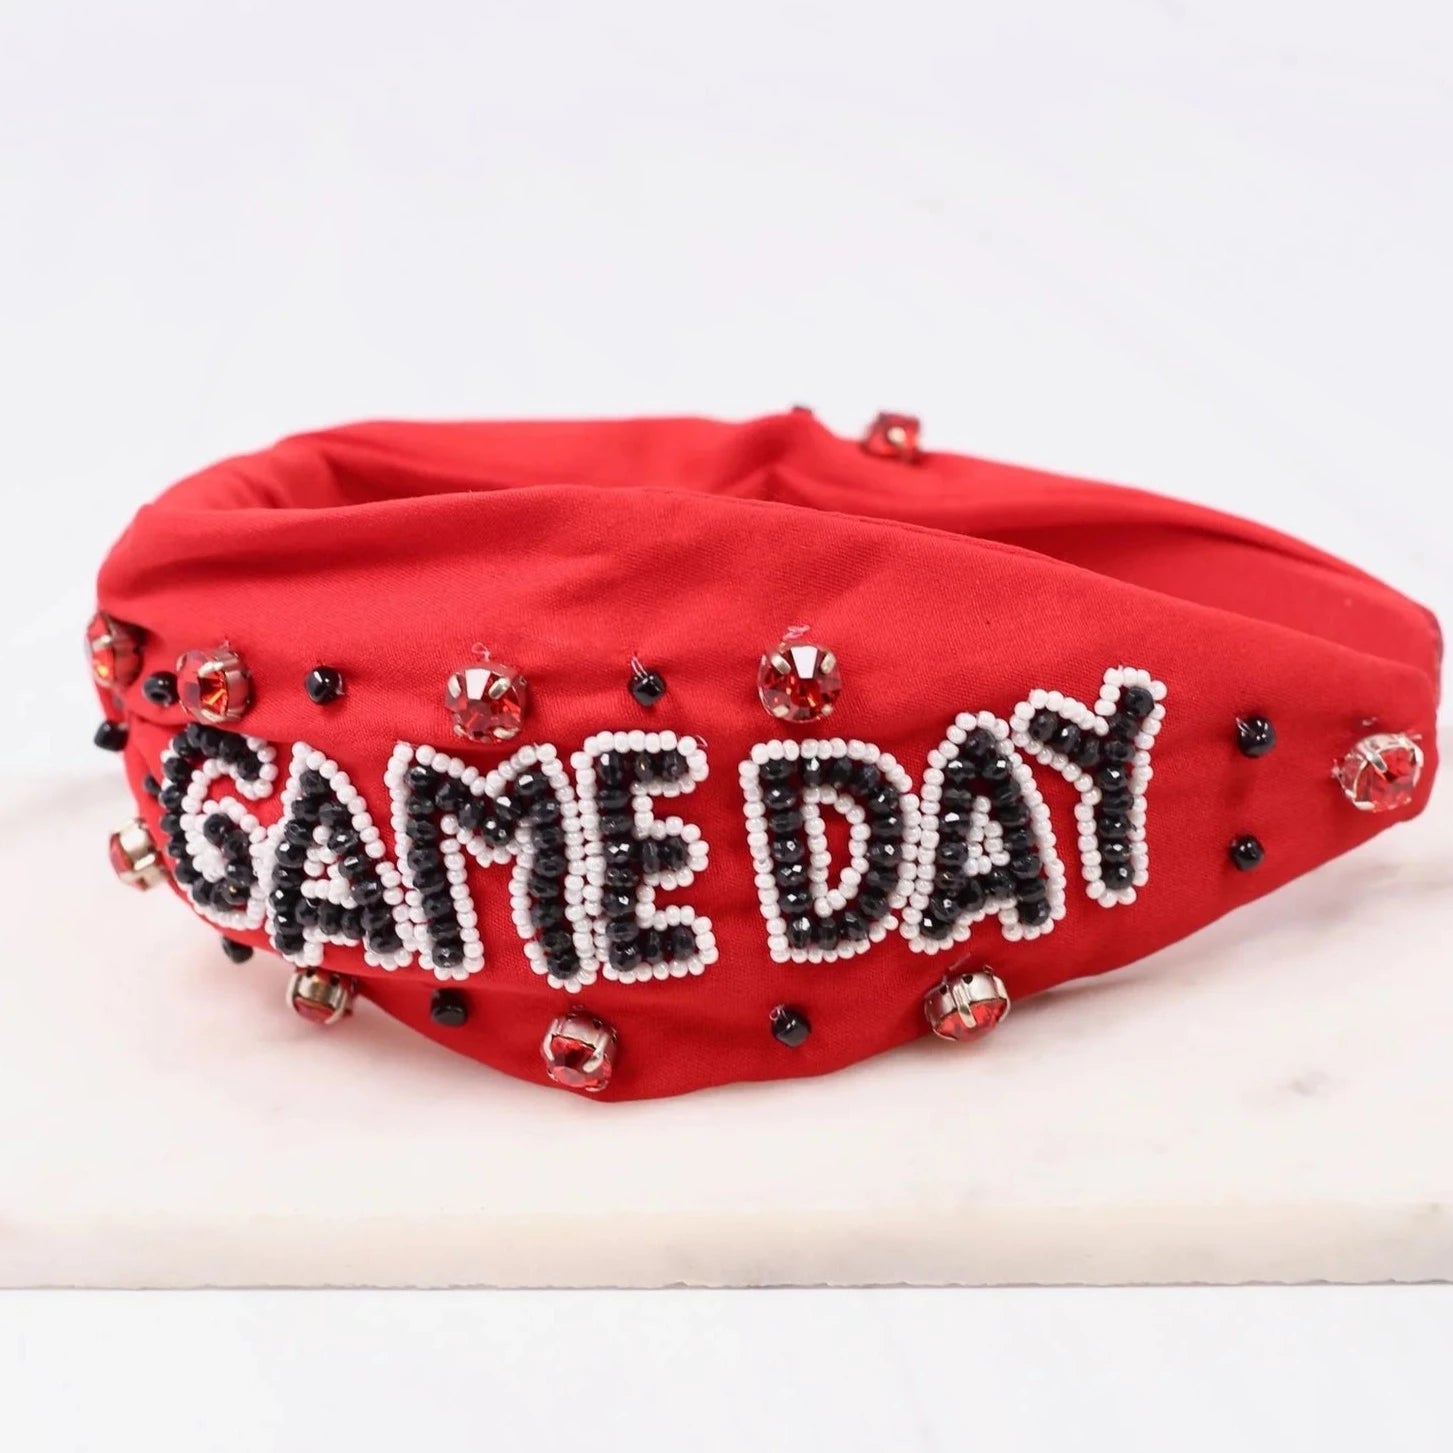 Gameday Embellished Headband - Red, Black & White-Headbands-LouisGeorge Boutique-LouisGeorge Boutique, Women’s Fashion Boutique Located in Trussville, Alabama